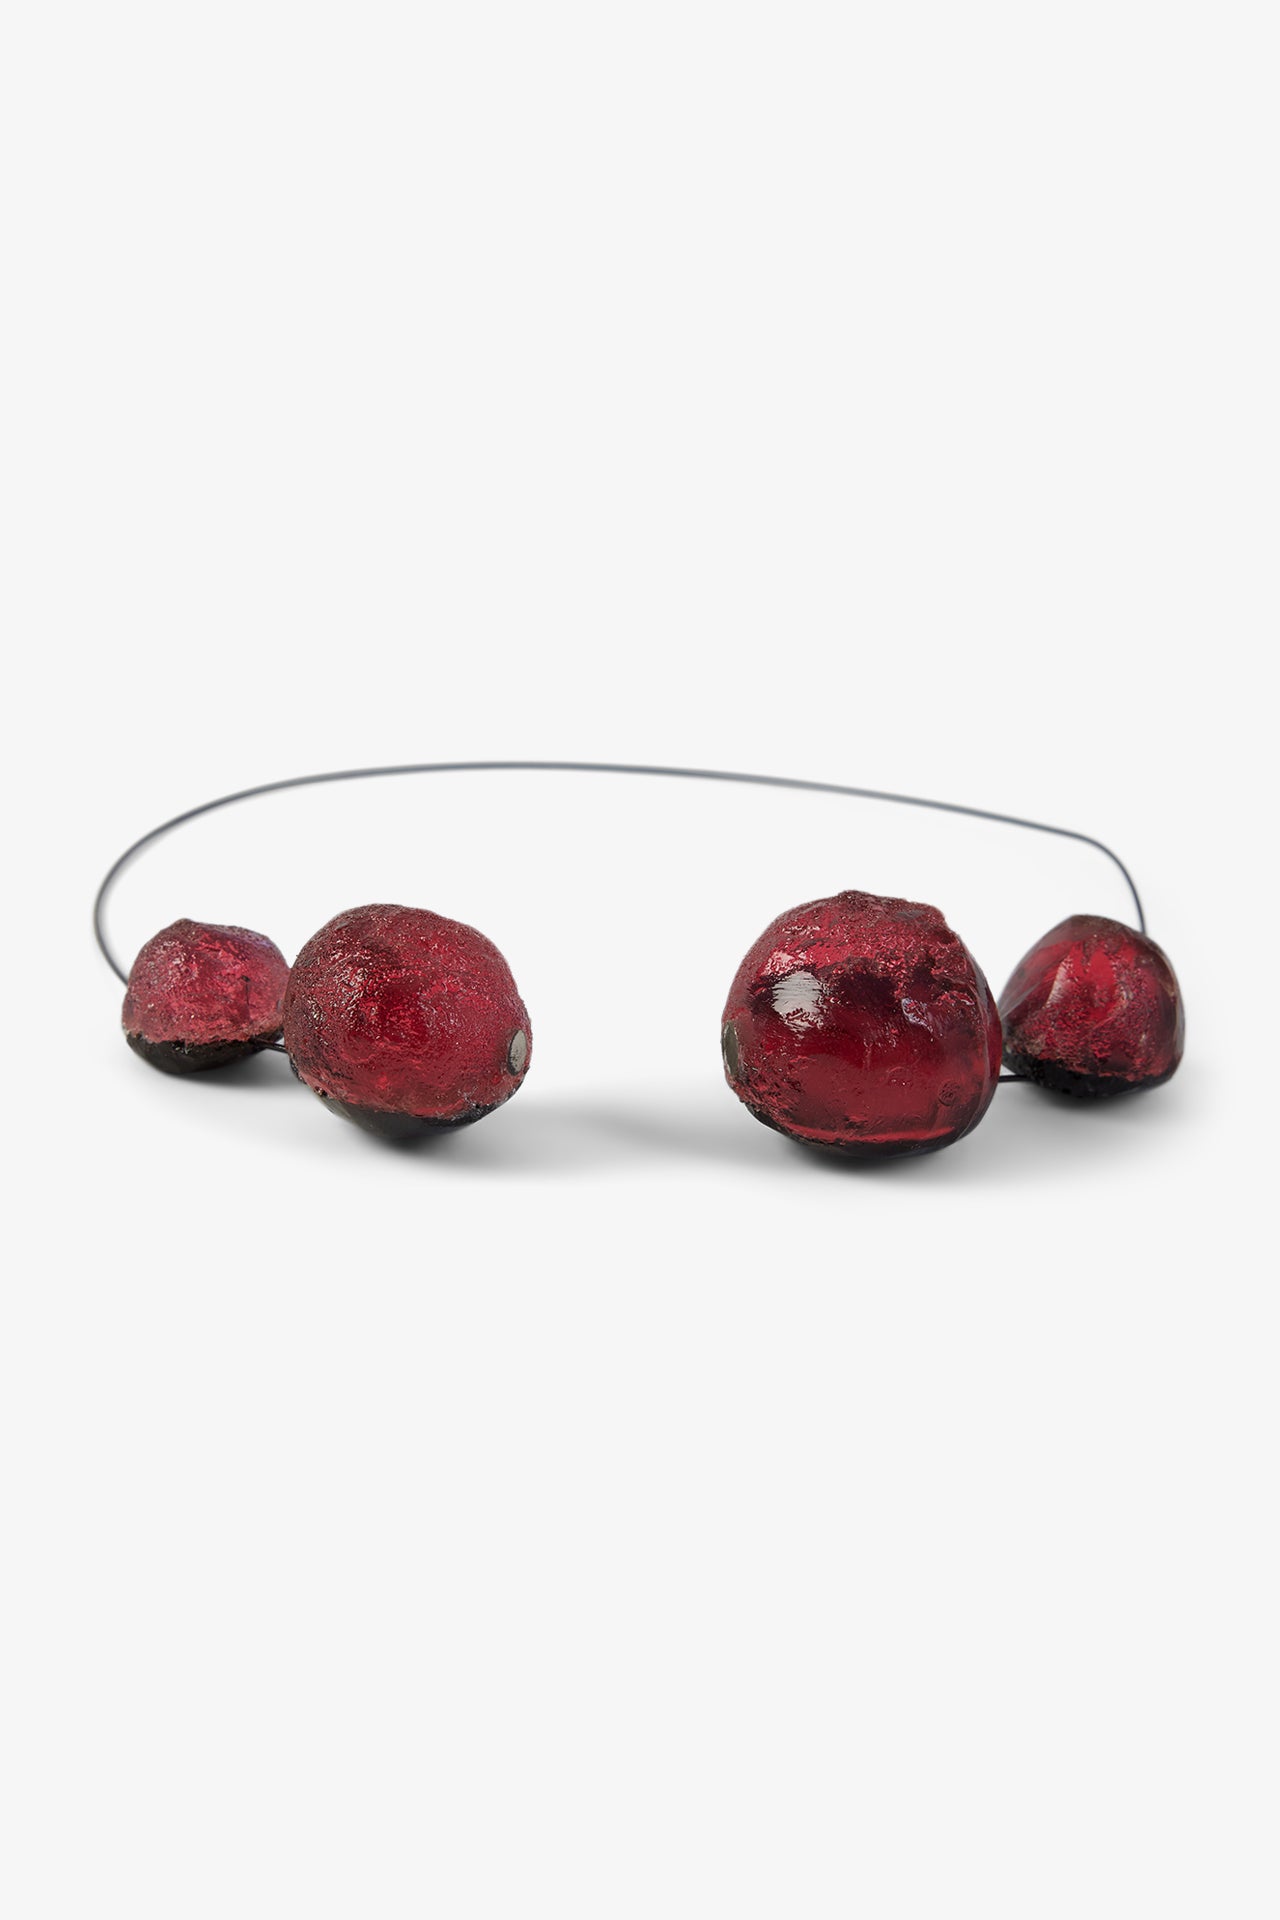 Collier 4 boules Roses Orangées - Marianne Olry